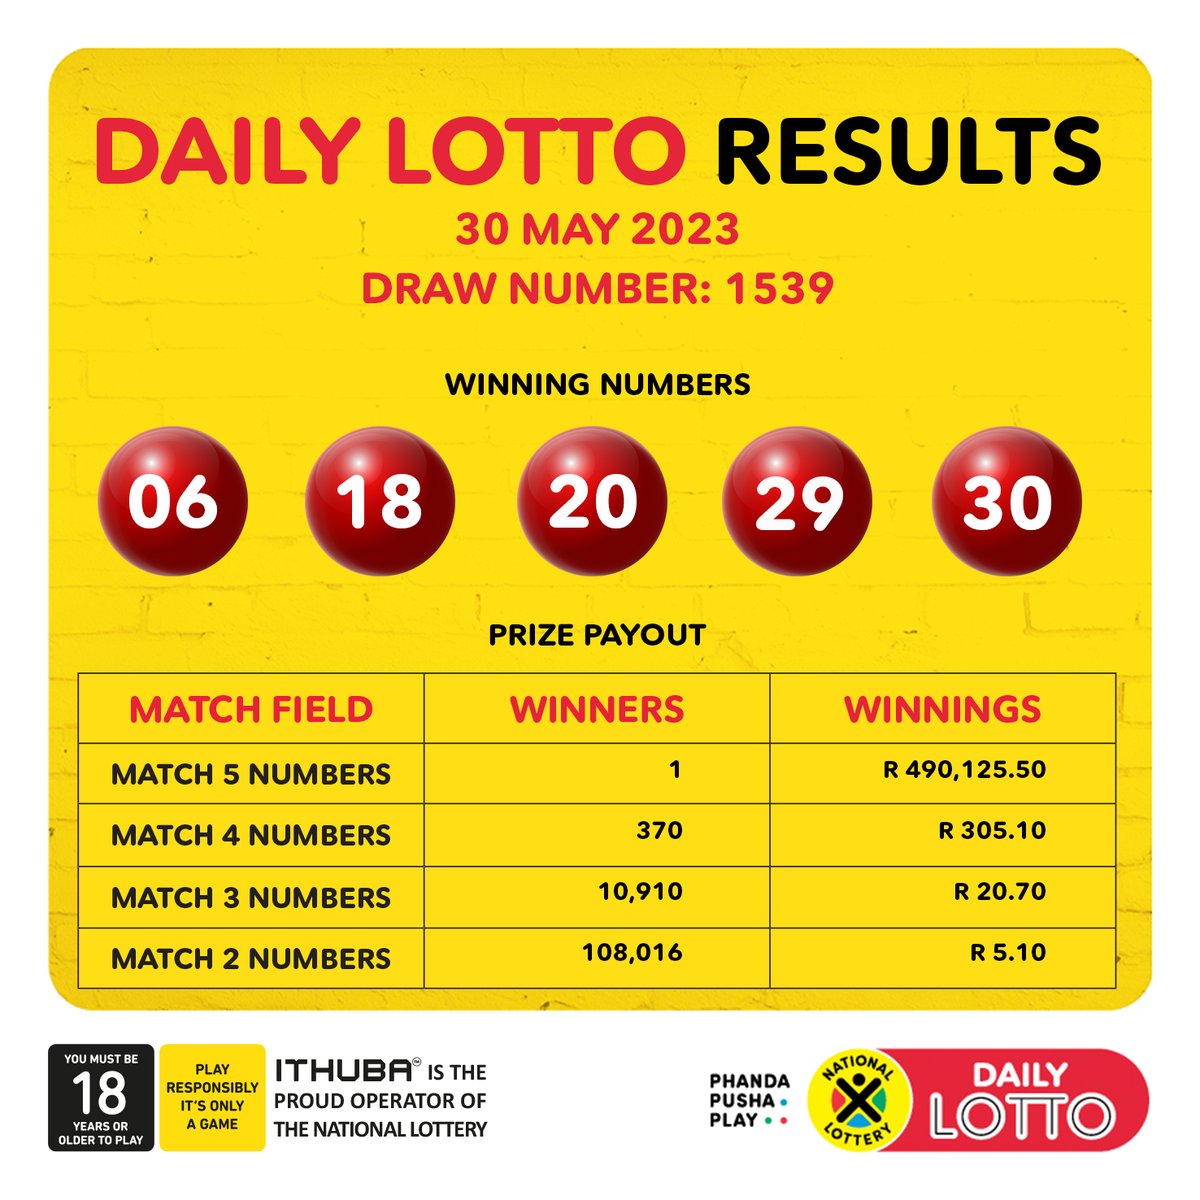 Here are the DrawResults & Payouts for (30/05/23):
 
#DAILY LOTTO: 06, 18, 20, 29, 30
 
Congratulations to all the #winners!